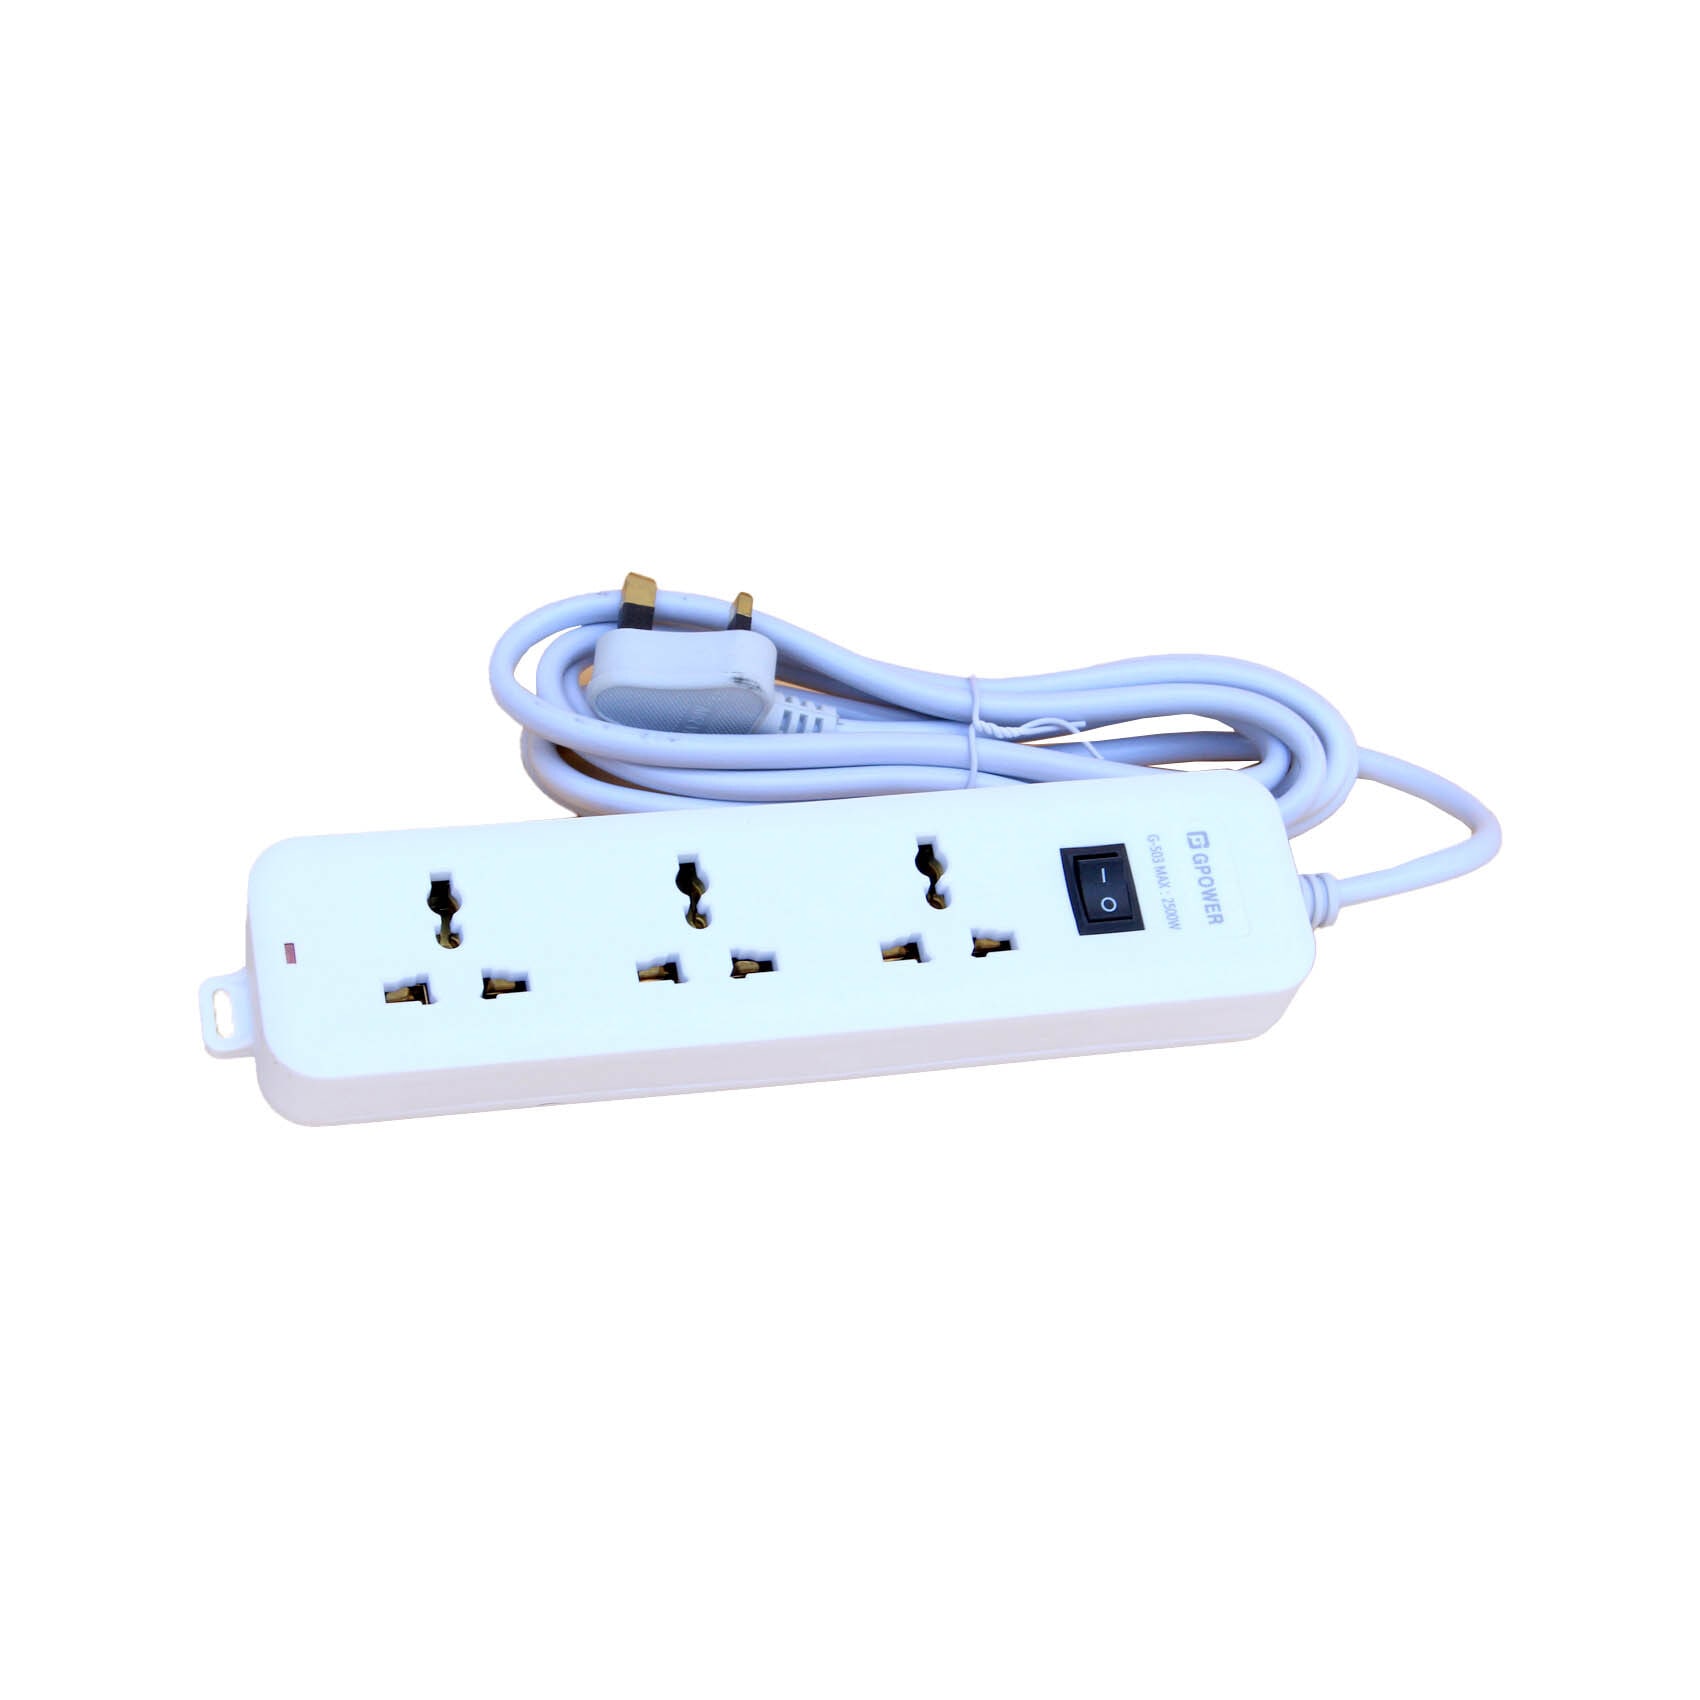 Buy Extension Leads & Cables Online - Shop on Carrefour Qatar